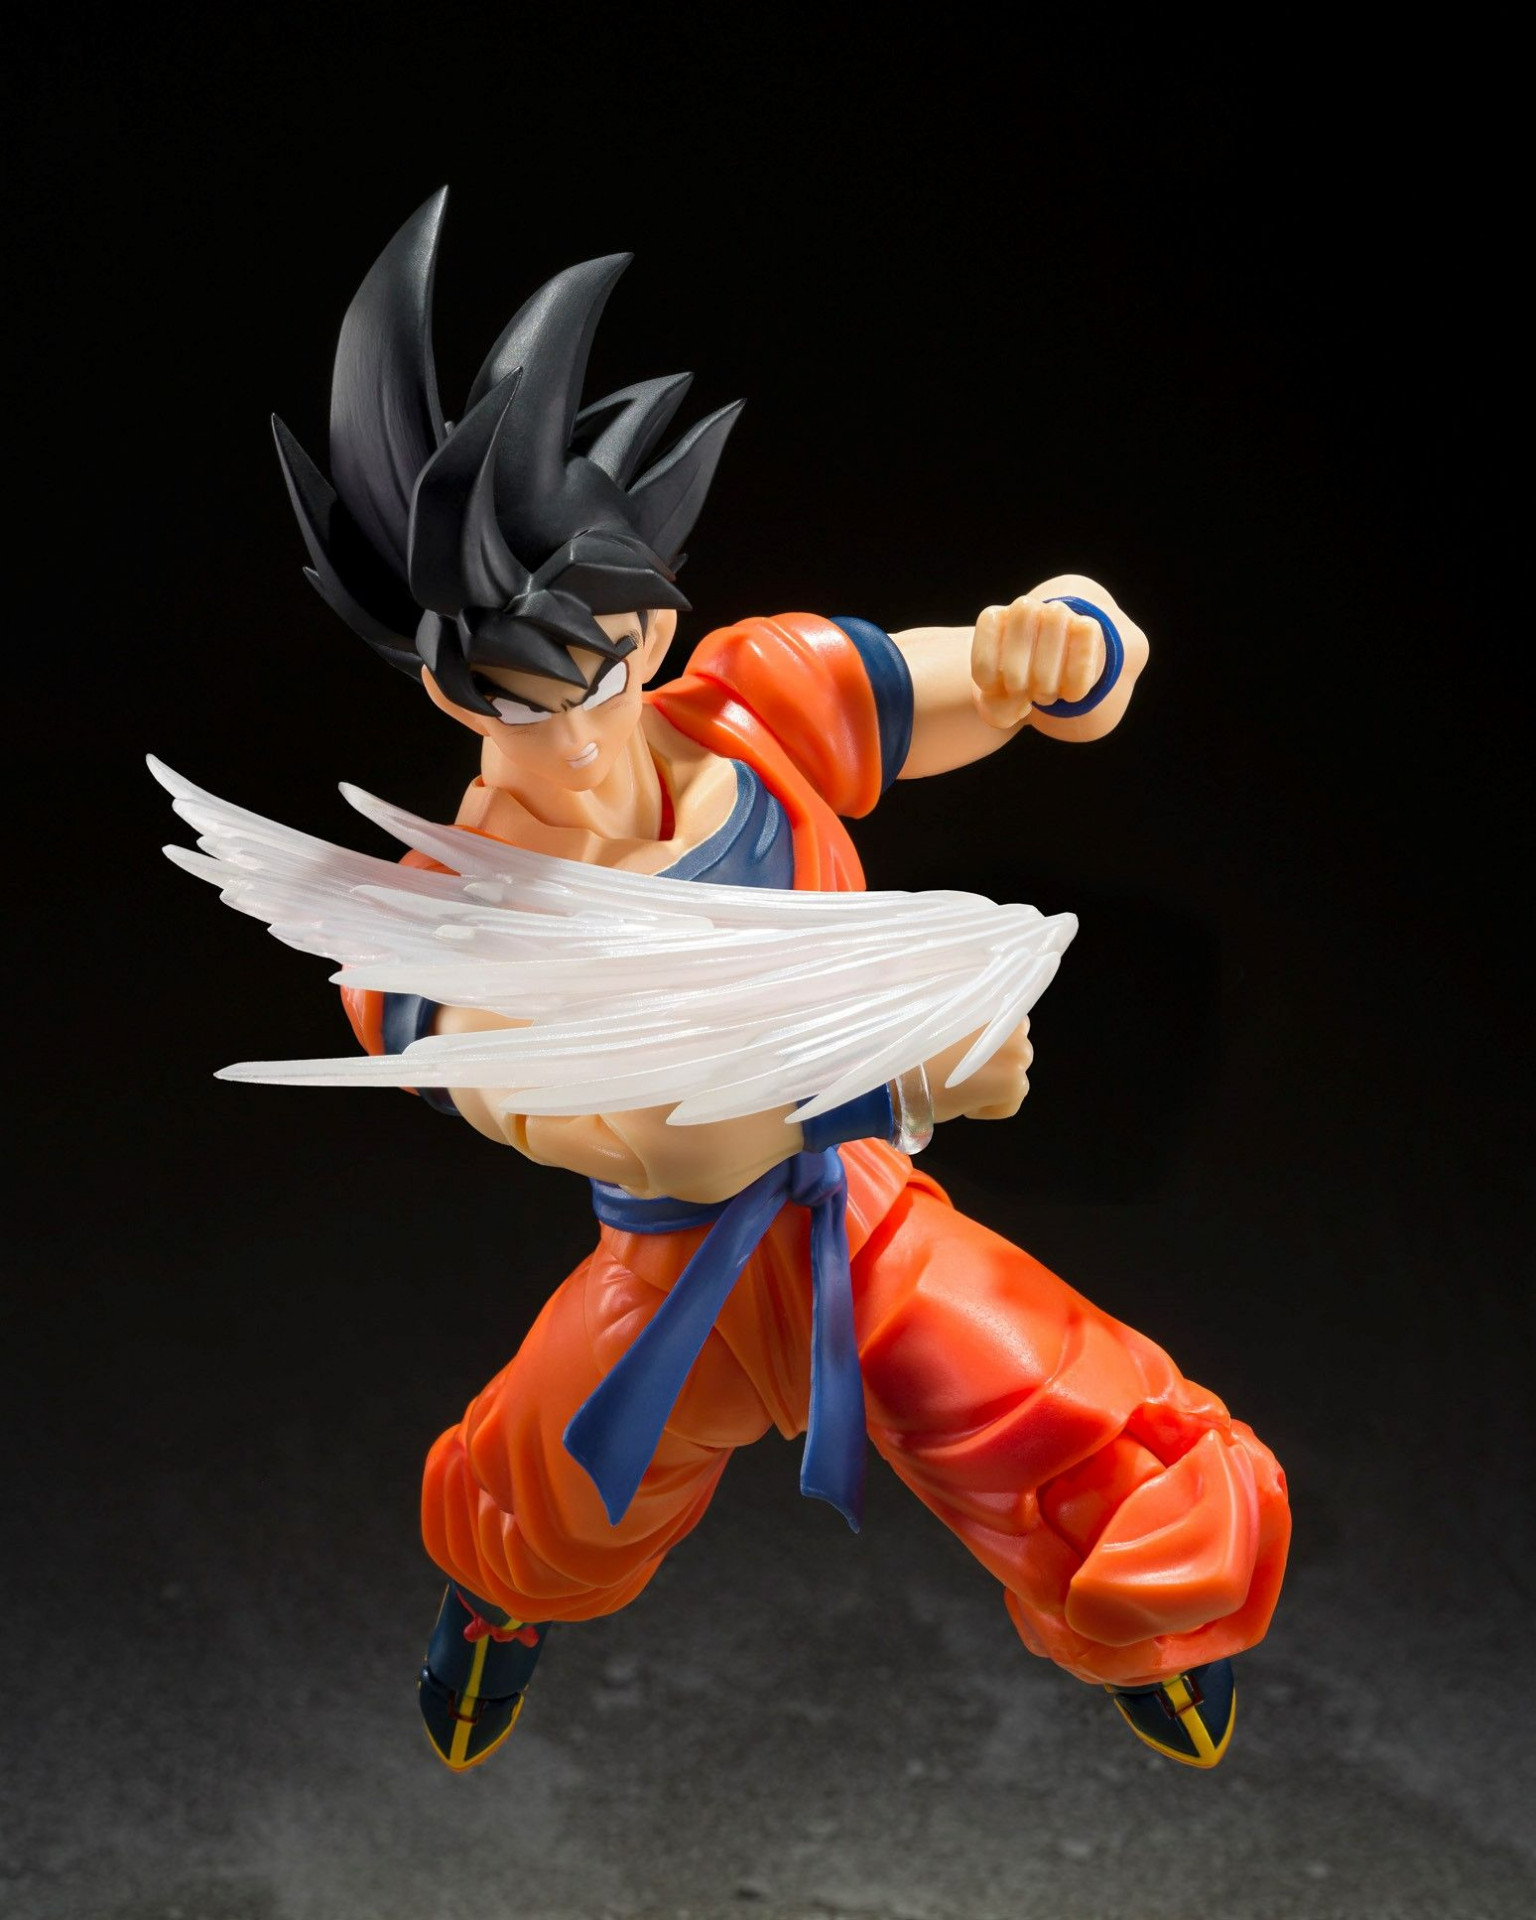 Goku's Effect Parts Set Debuts in the S.H.Figuarts Series!